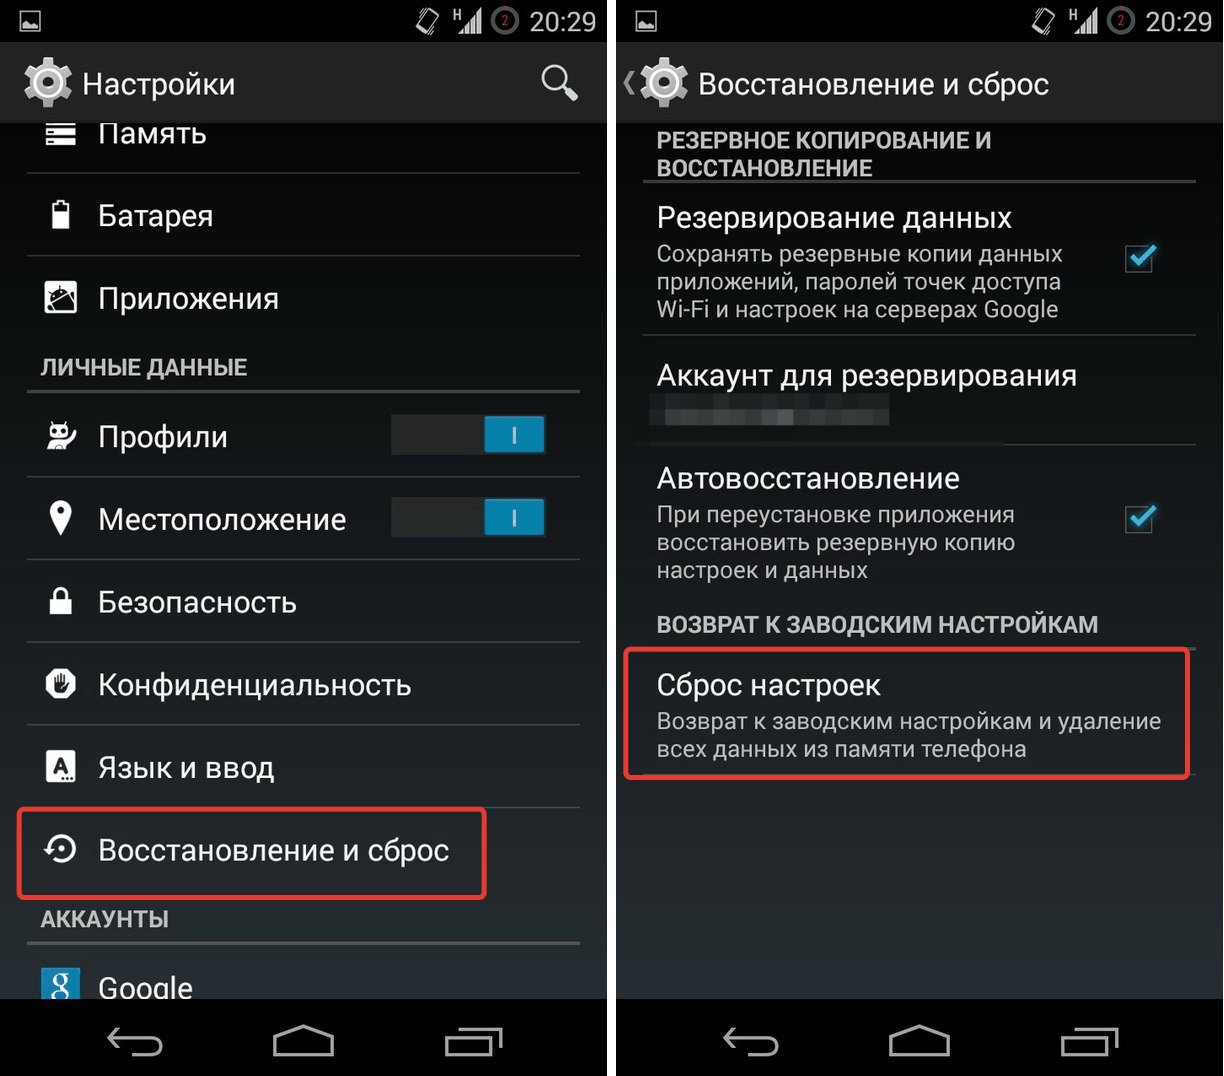 Image 7. Reset Android device to factory settings in a standard way.